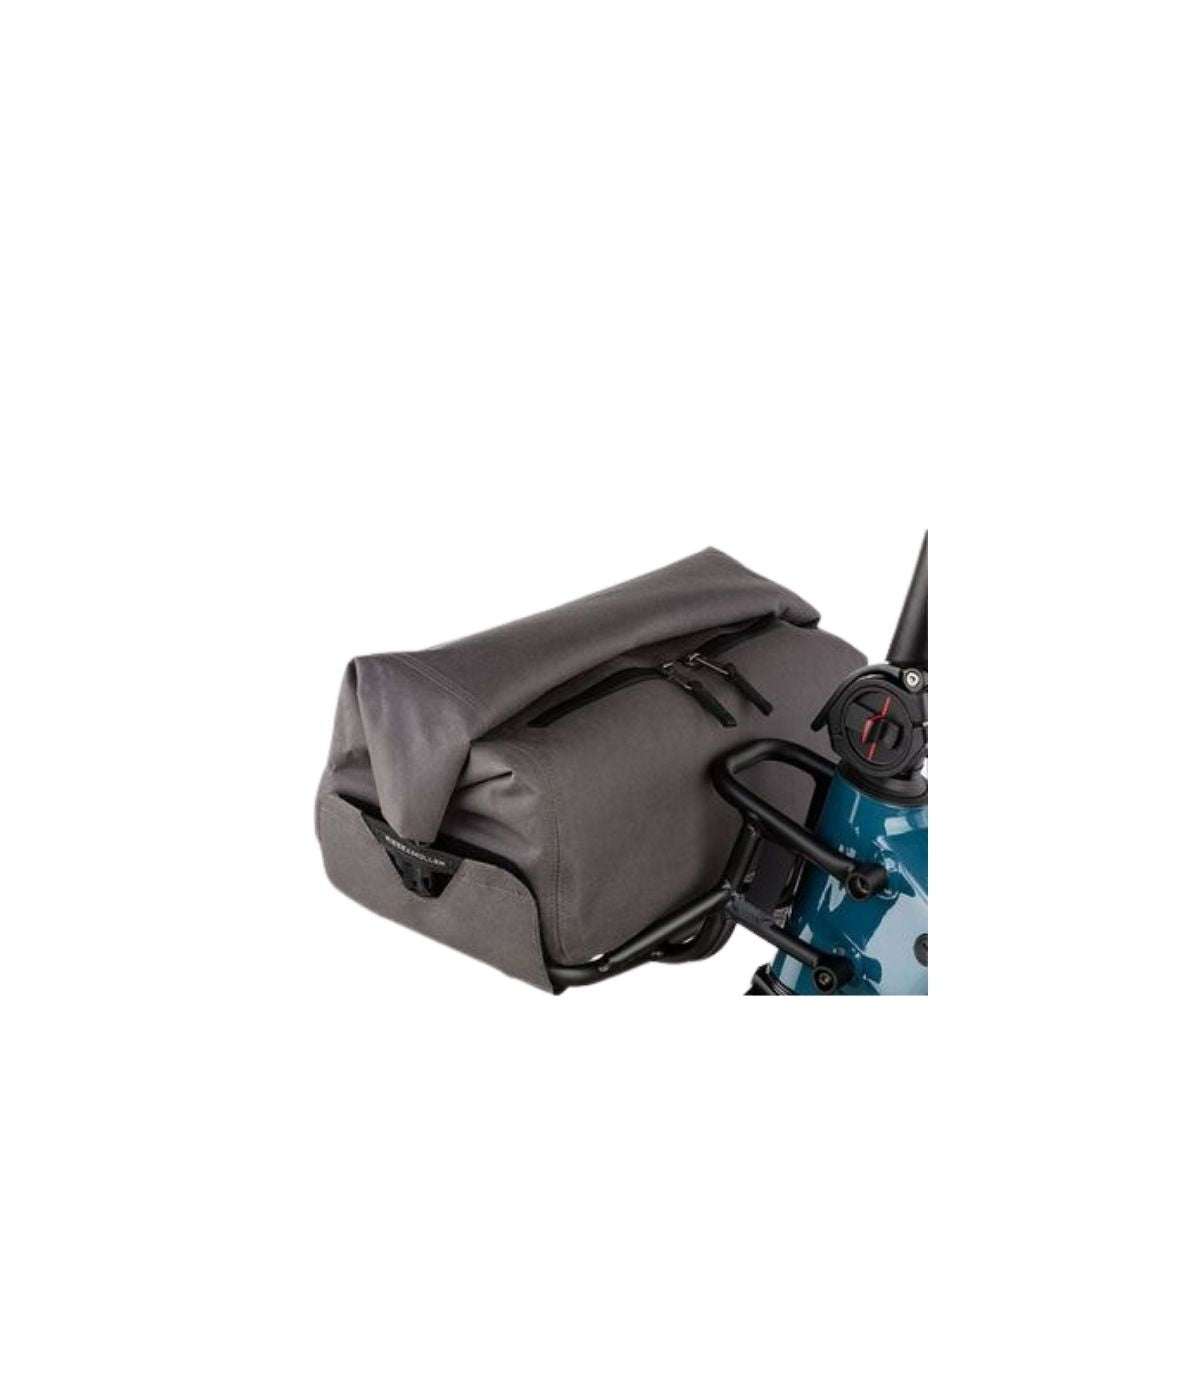 Multitinker front carrier with bag